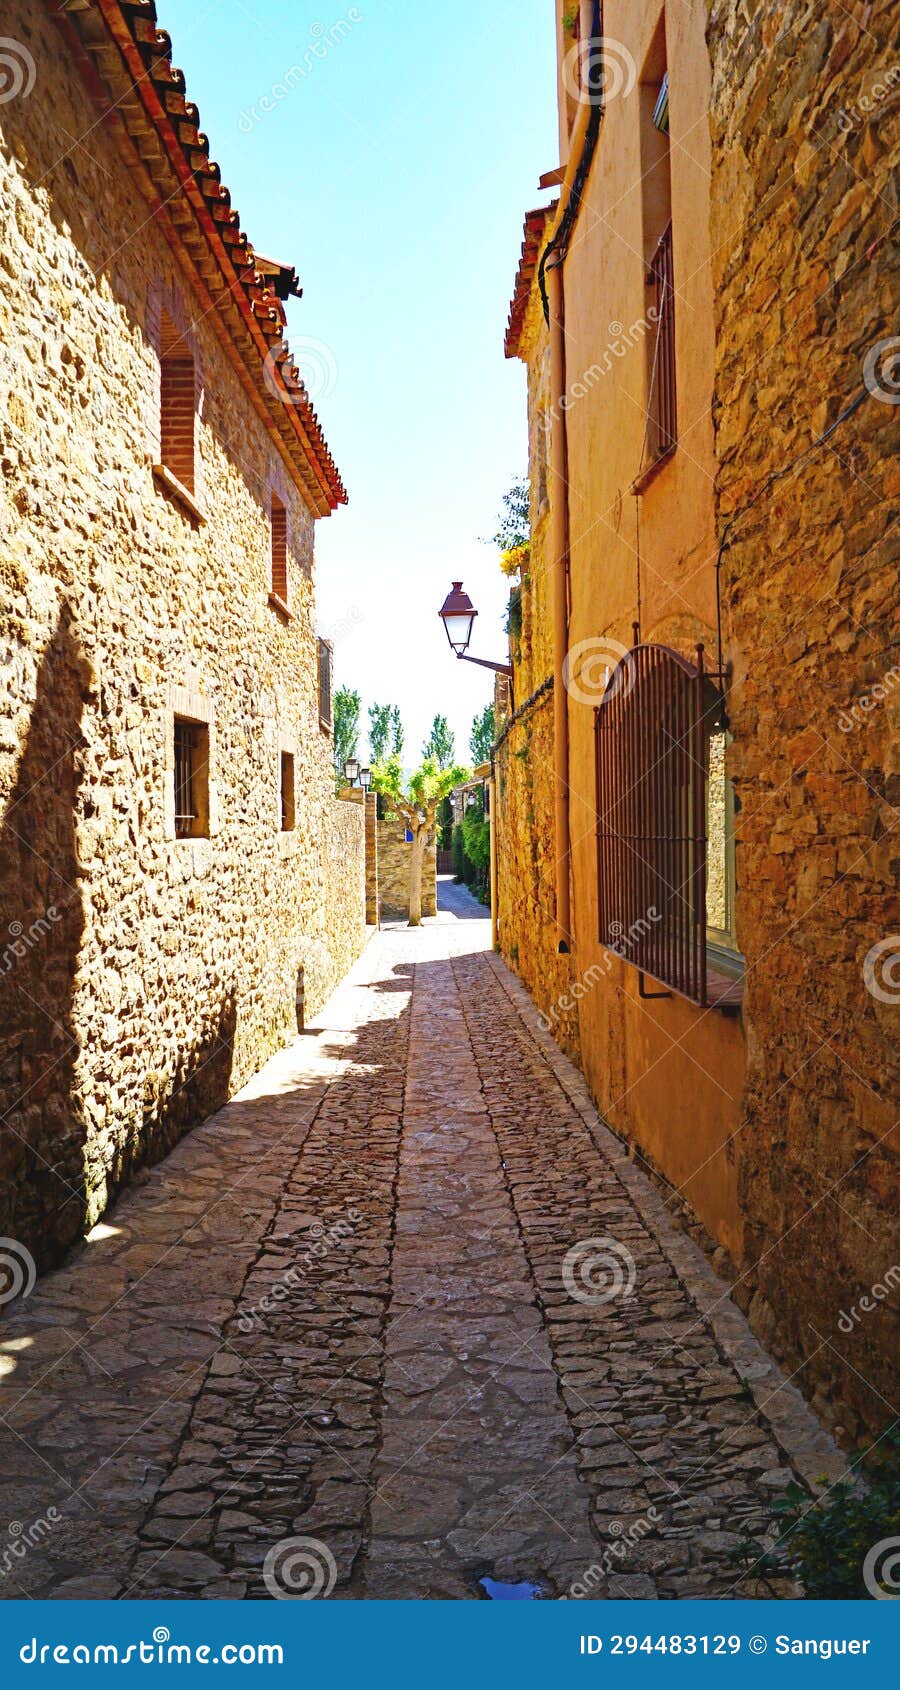 streets and buildings of peratallada, municipality of forallac, bajo ampurdÃ¡n